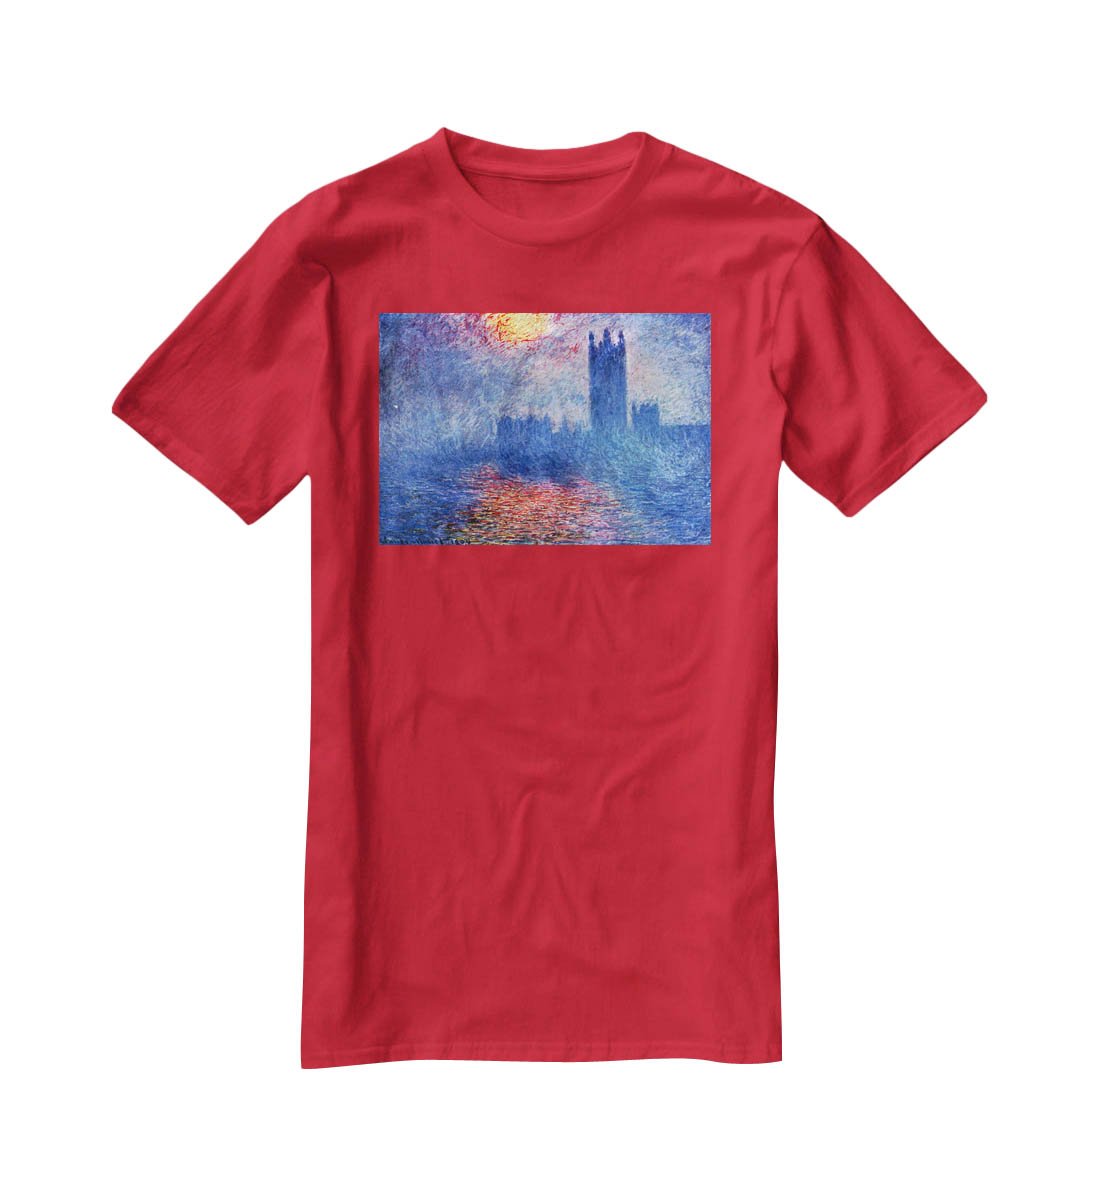 The Parlaiment in London by Monet T-Shirt - Canvas Art Rocks - 4